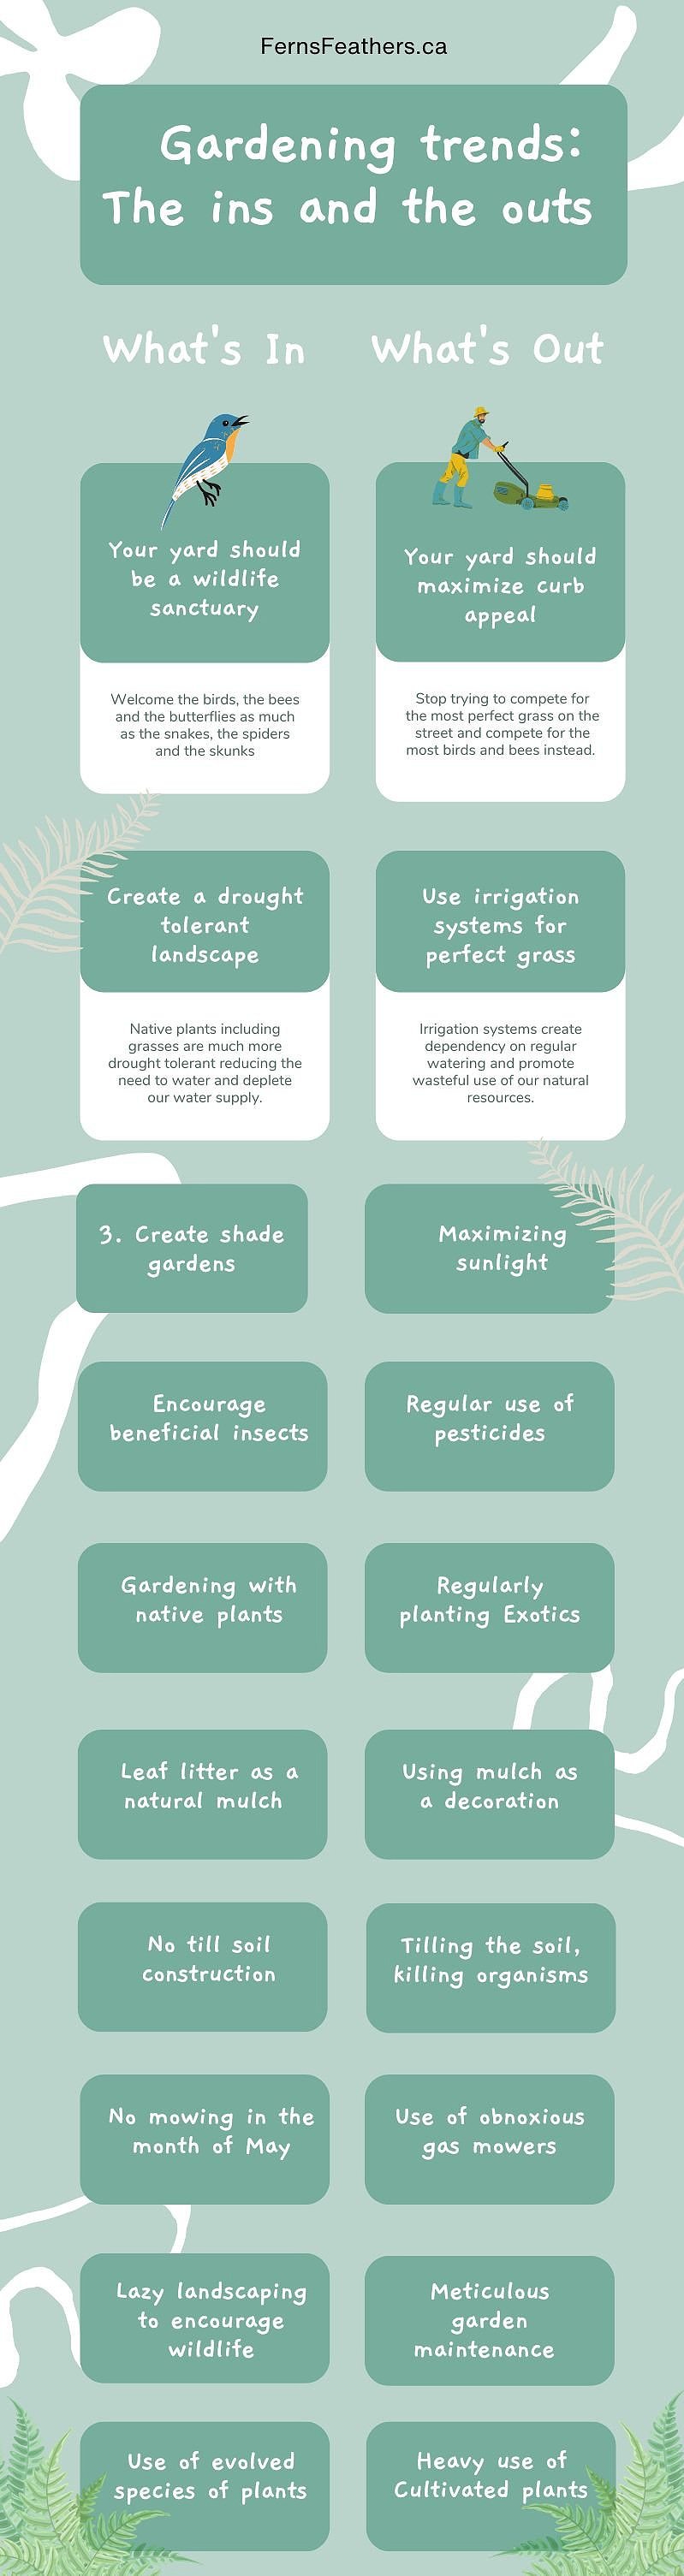 Gardening trends what's in and what's out